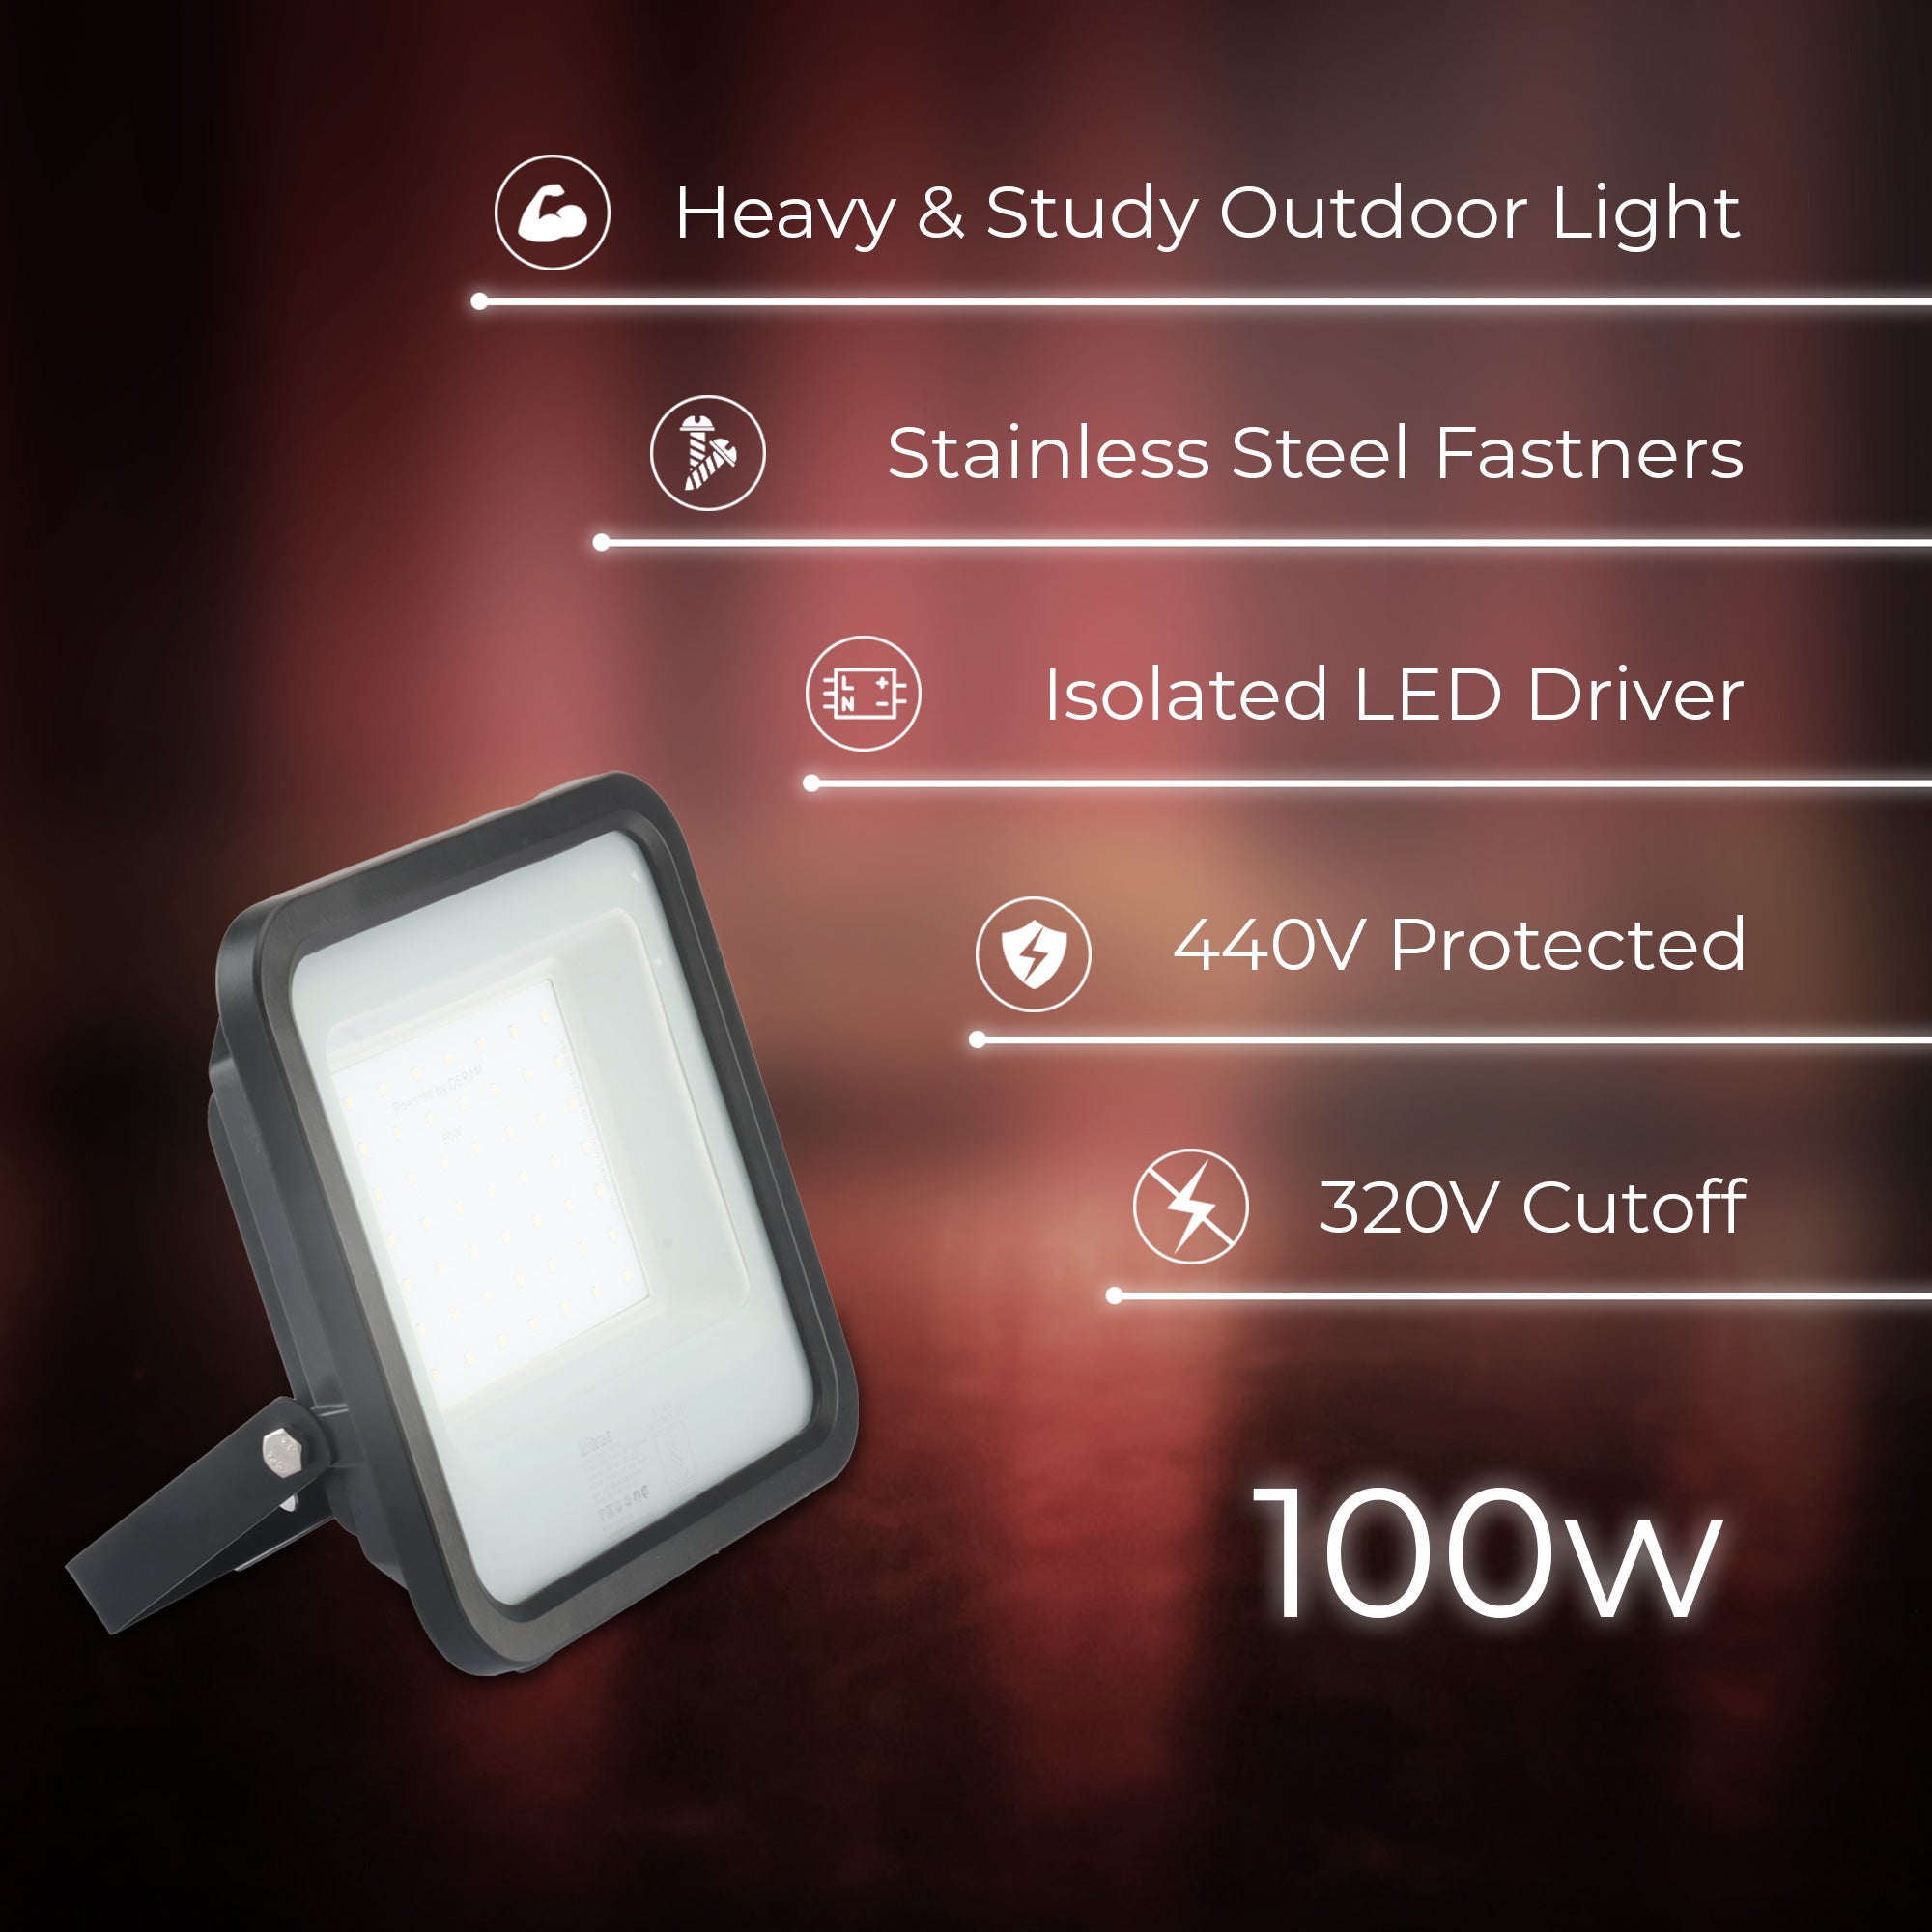 Specifications of Fabra 100W led focus light #watts_100w